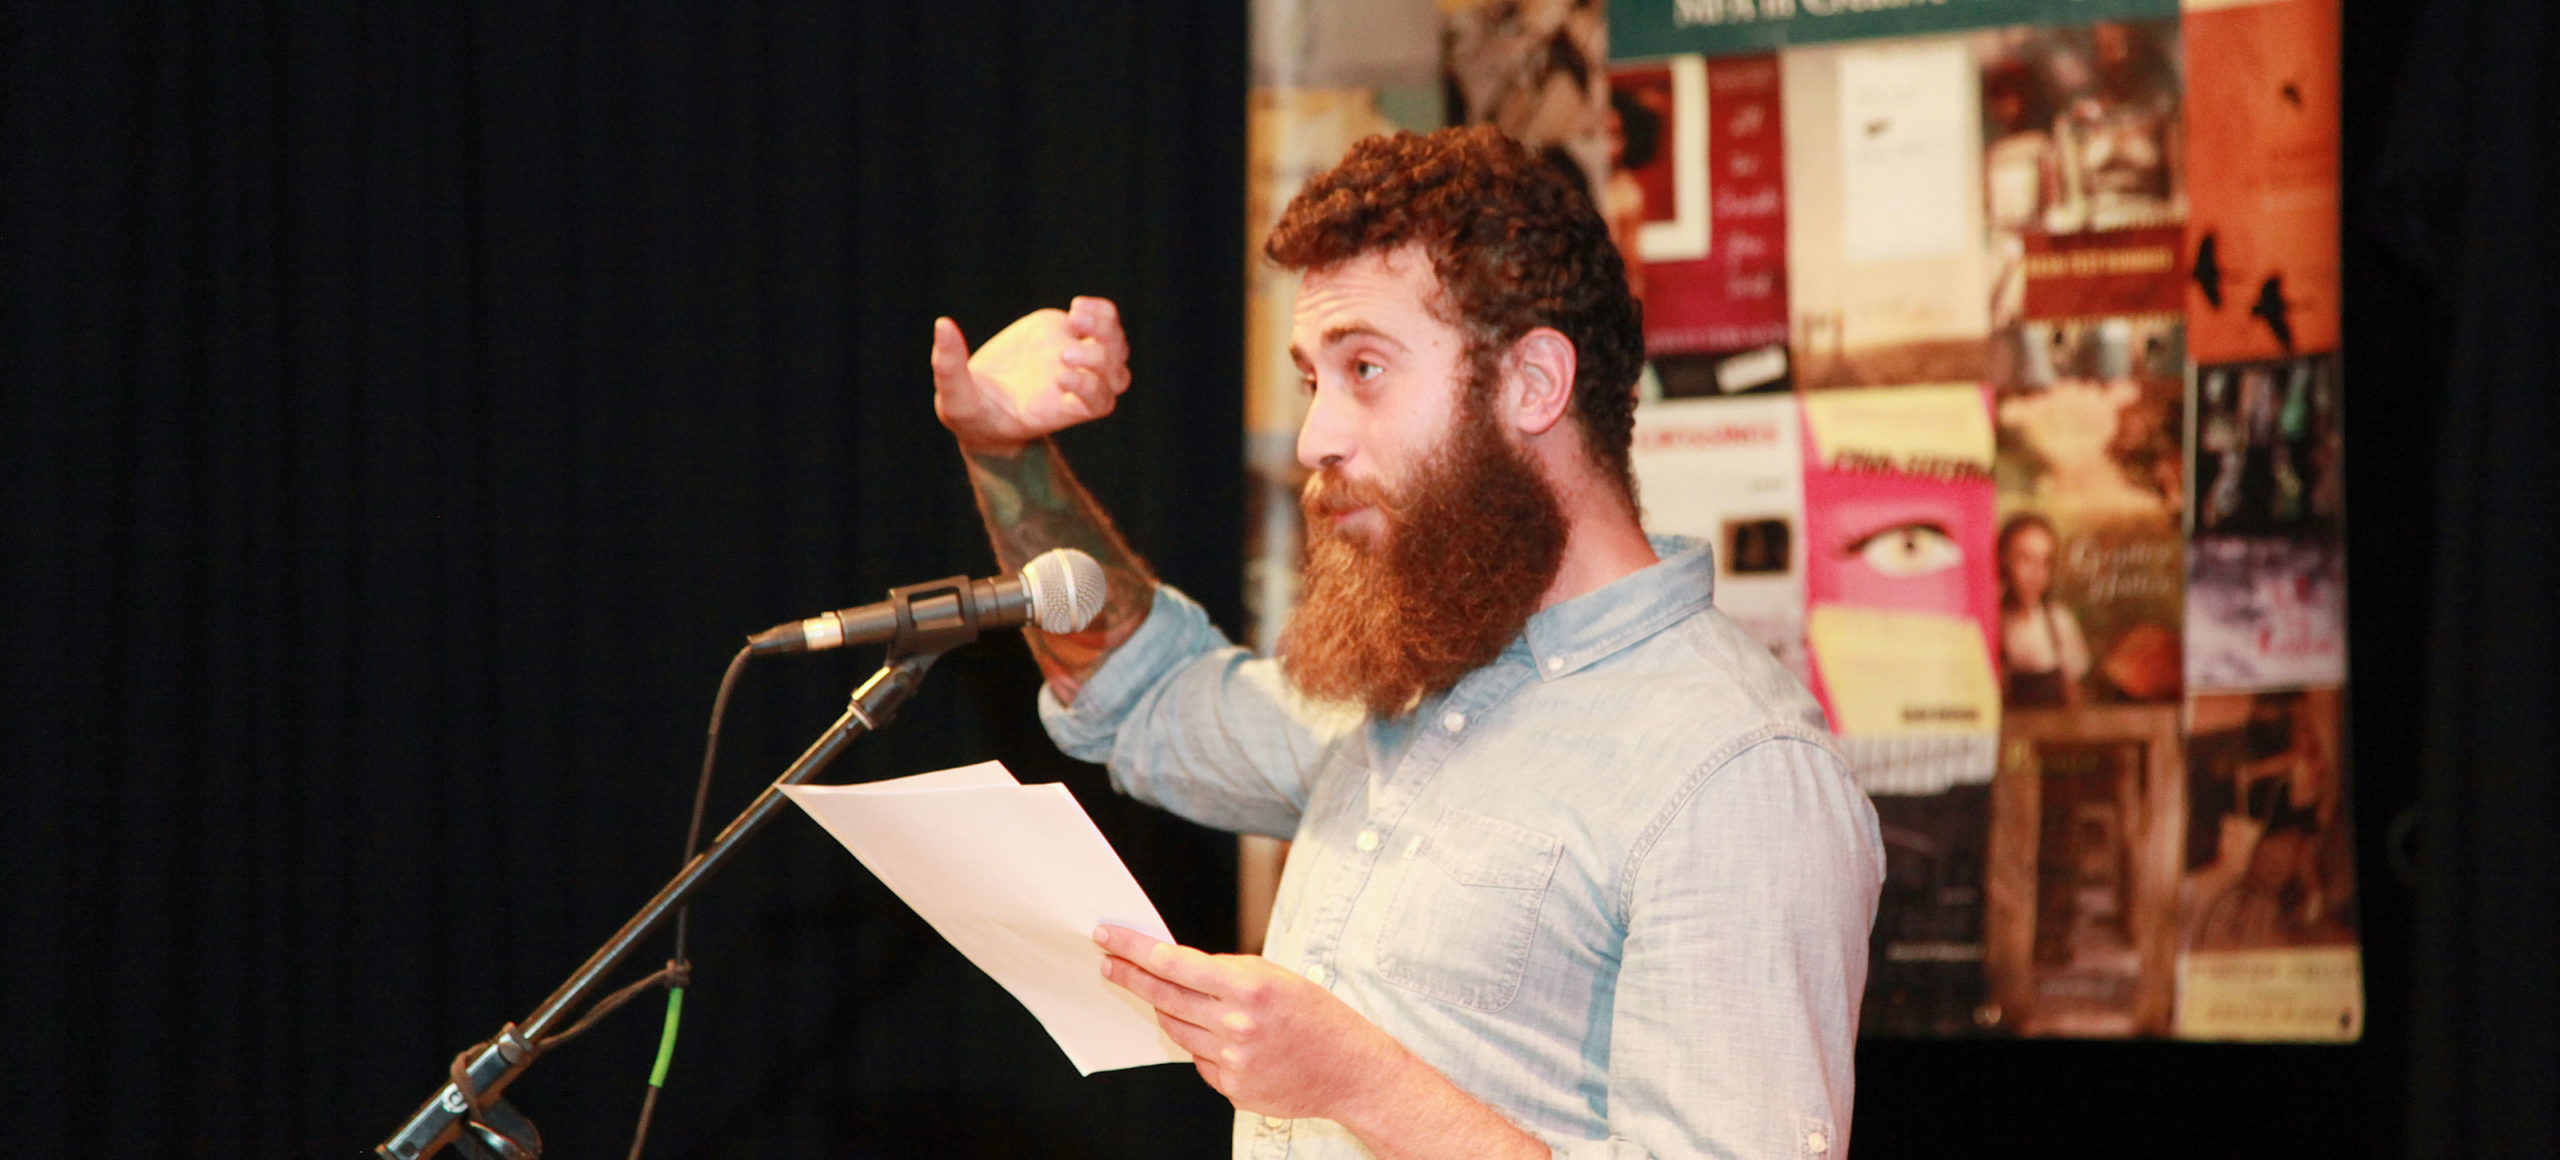 Man with long red beard speaking to crowd making a pouring something out hand gesture